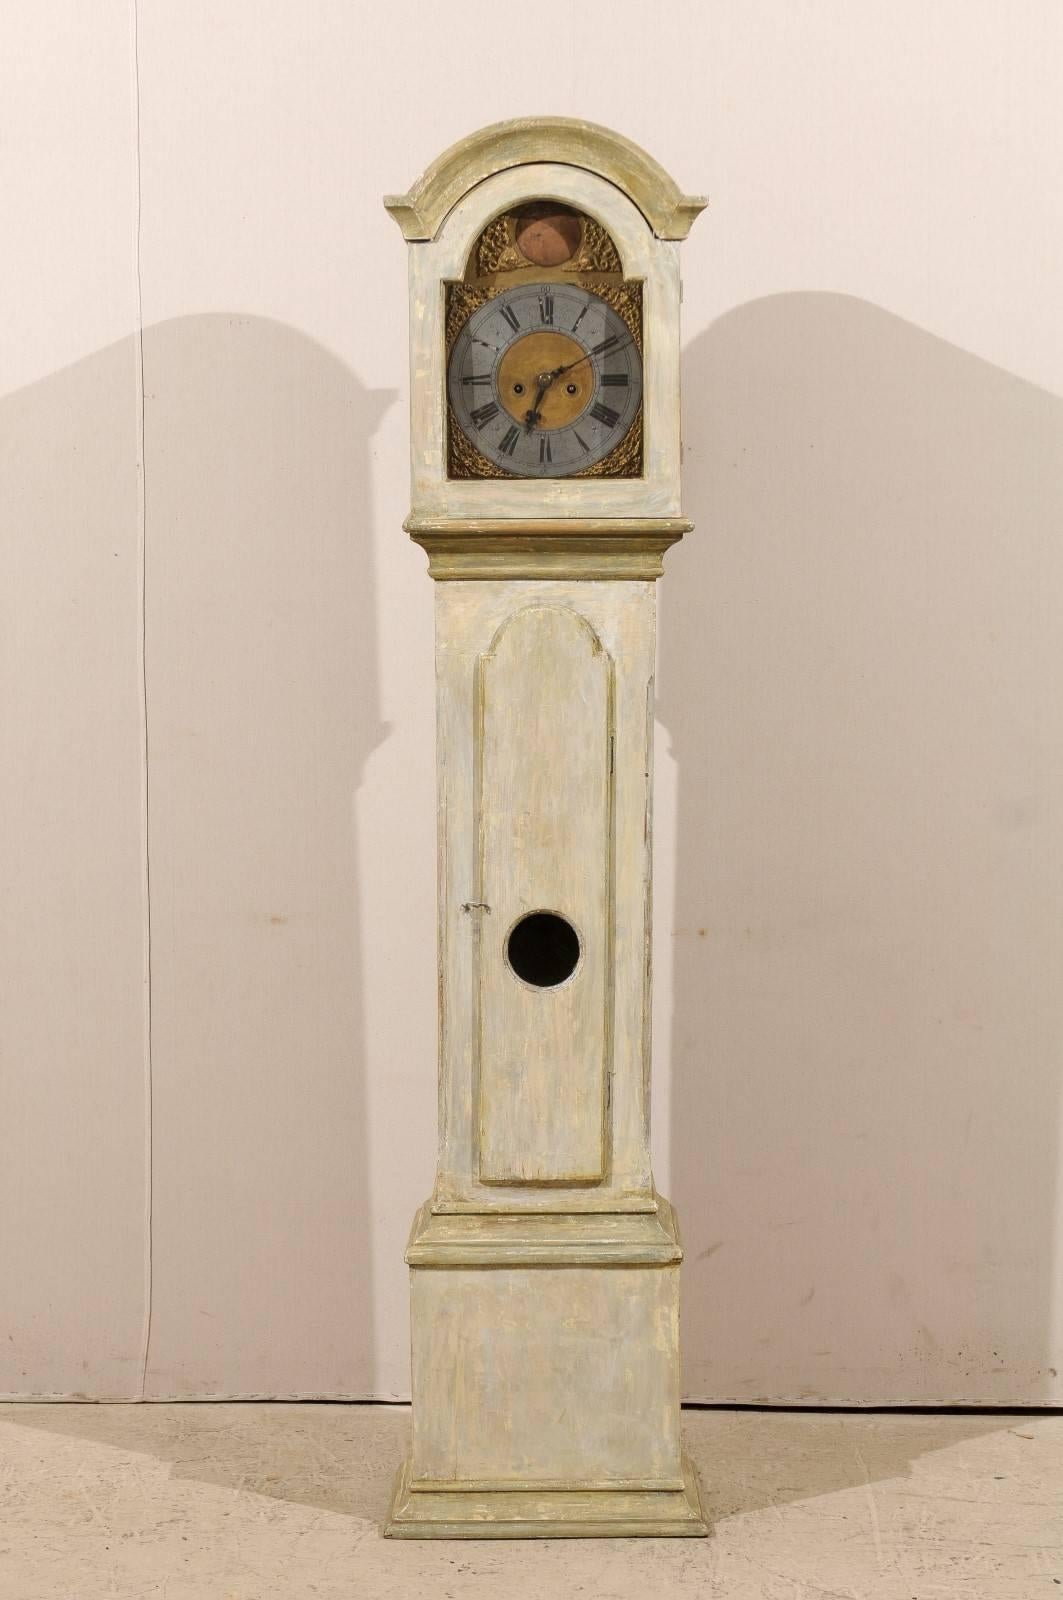 A Swedish 19th century long case clock. This Swedish straight body clock features a bonnet crest and a pewter ring face over a gilded background.  This clock retains it's original metal face, hands and movement. Intricate ornaments adorn the corners